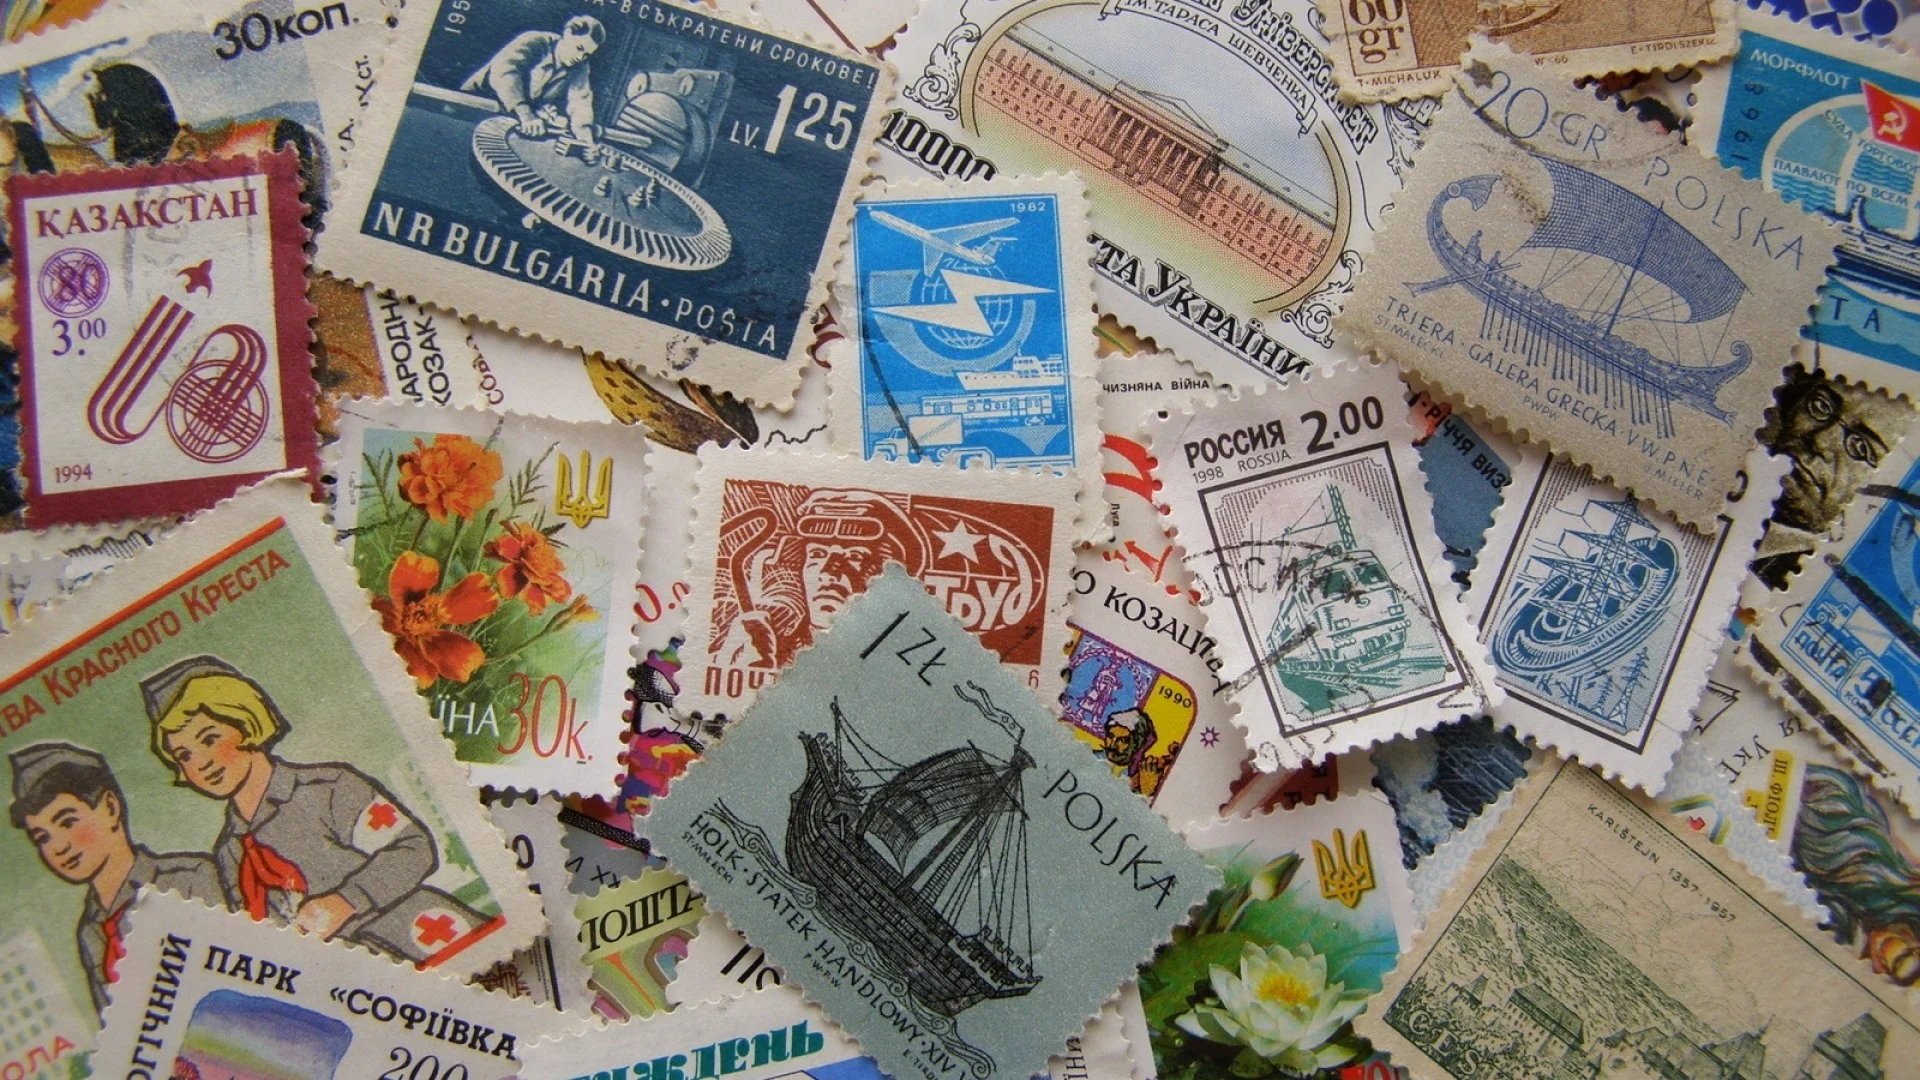 On World Post Day Here Are Some Of The Most Amazing Vintage Stamps Released  By India Post - The Better India